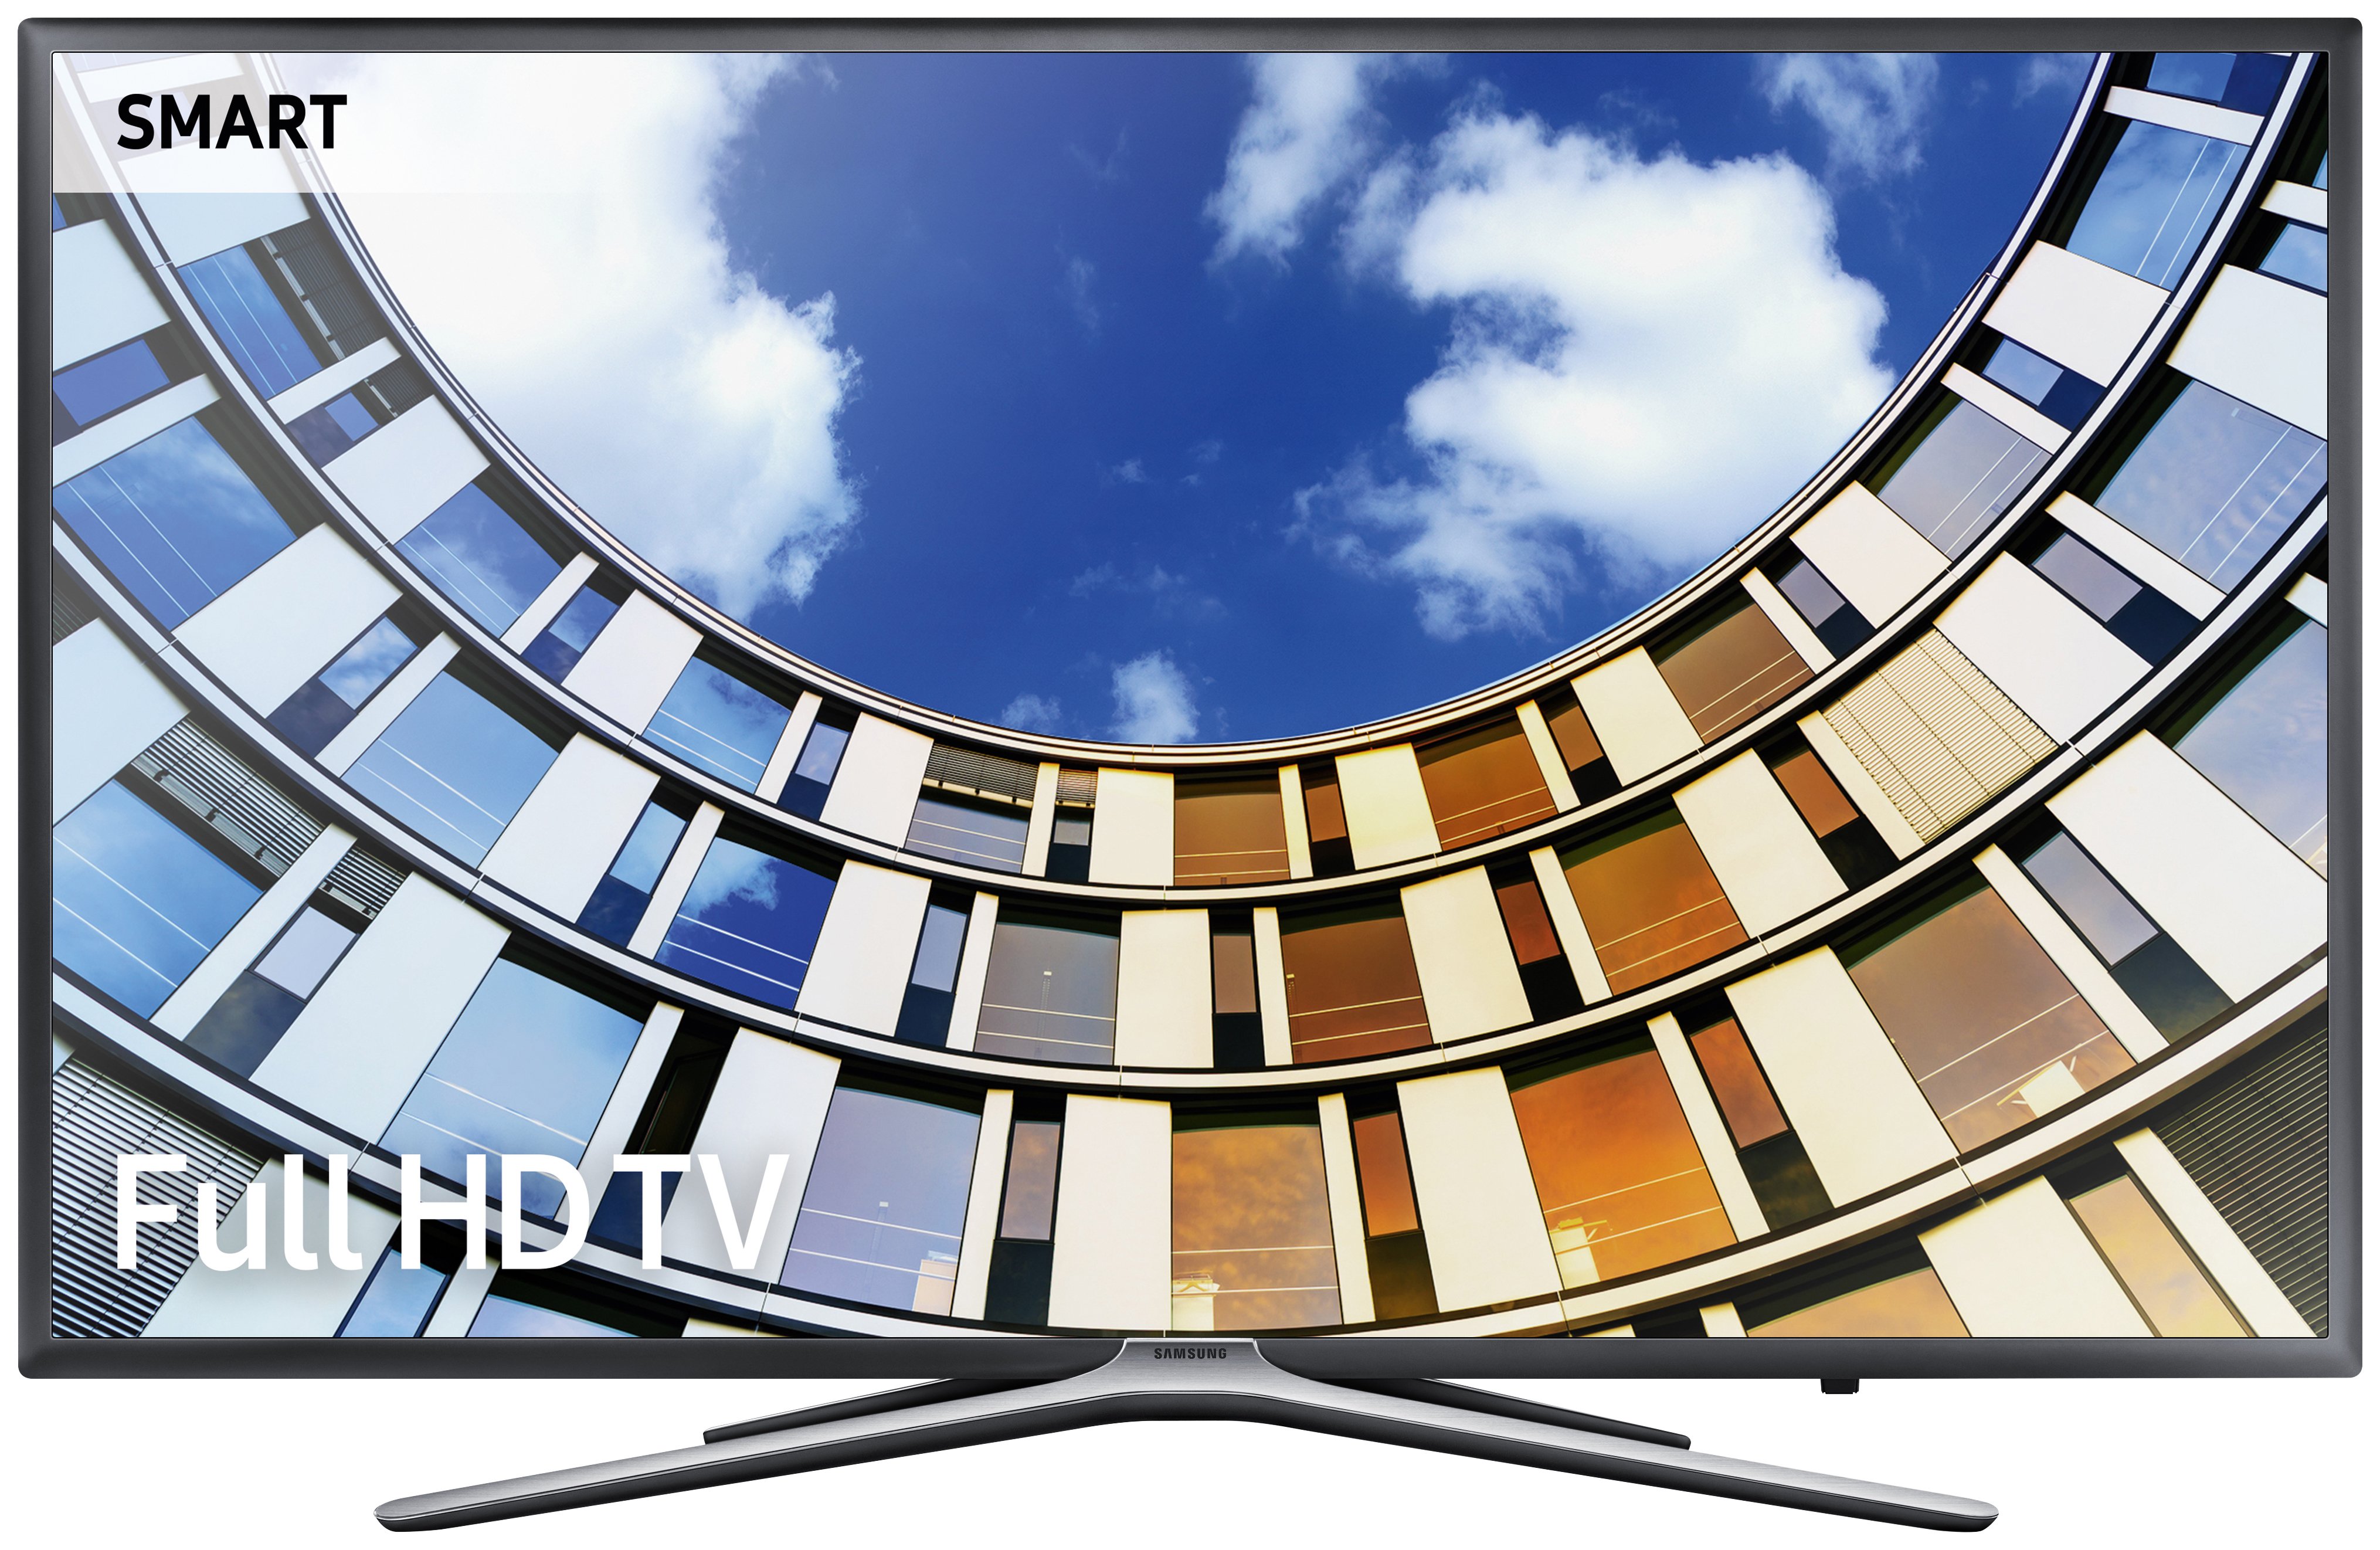 Samsung M5500 32 Inch Smart Full HD TV. Review